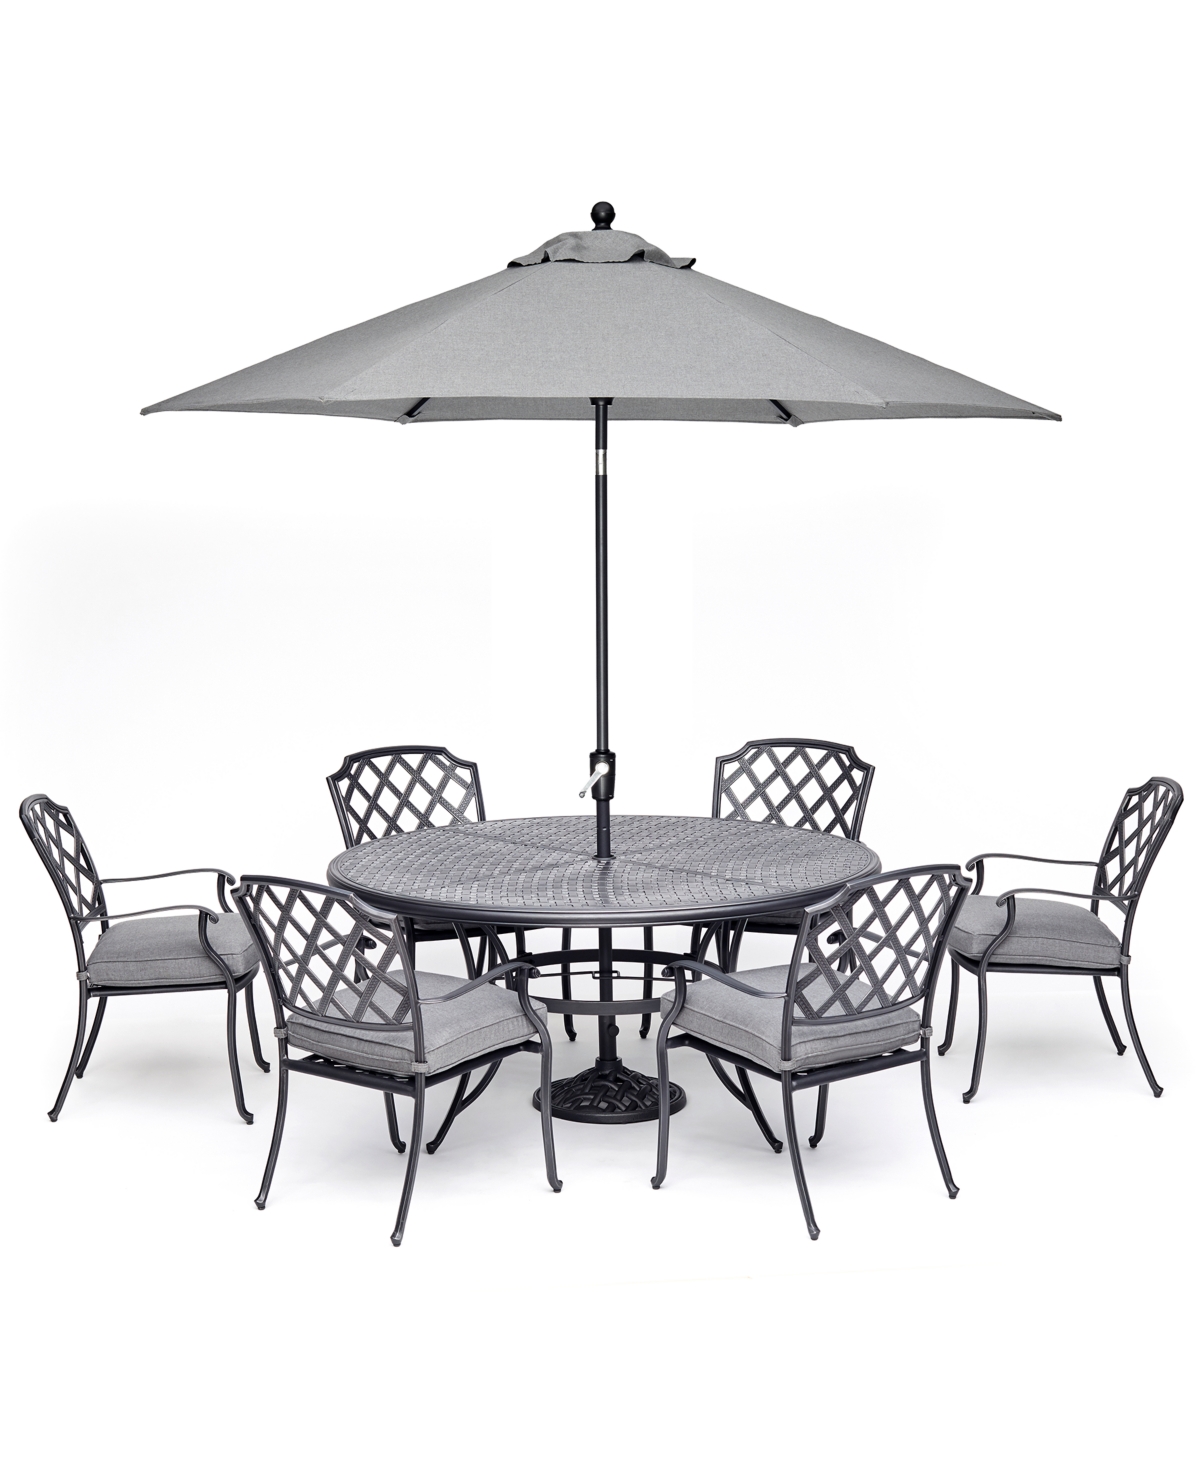 Vintage Ii Outdoor Cast Aluminum 7-Pc. Dining Set (61 Round Table & 6 Dining Chairs) With Sunbrella Cushions, Created for Macys